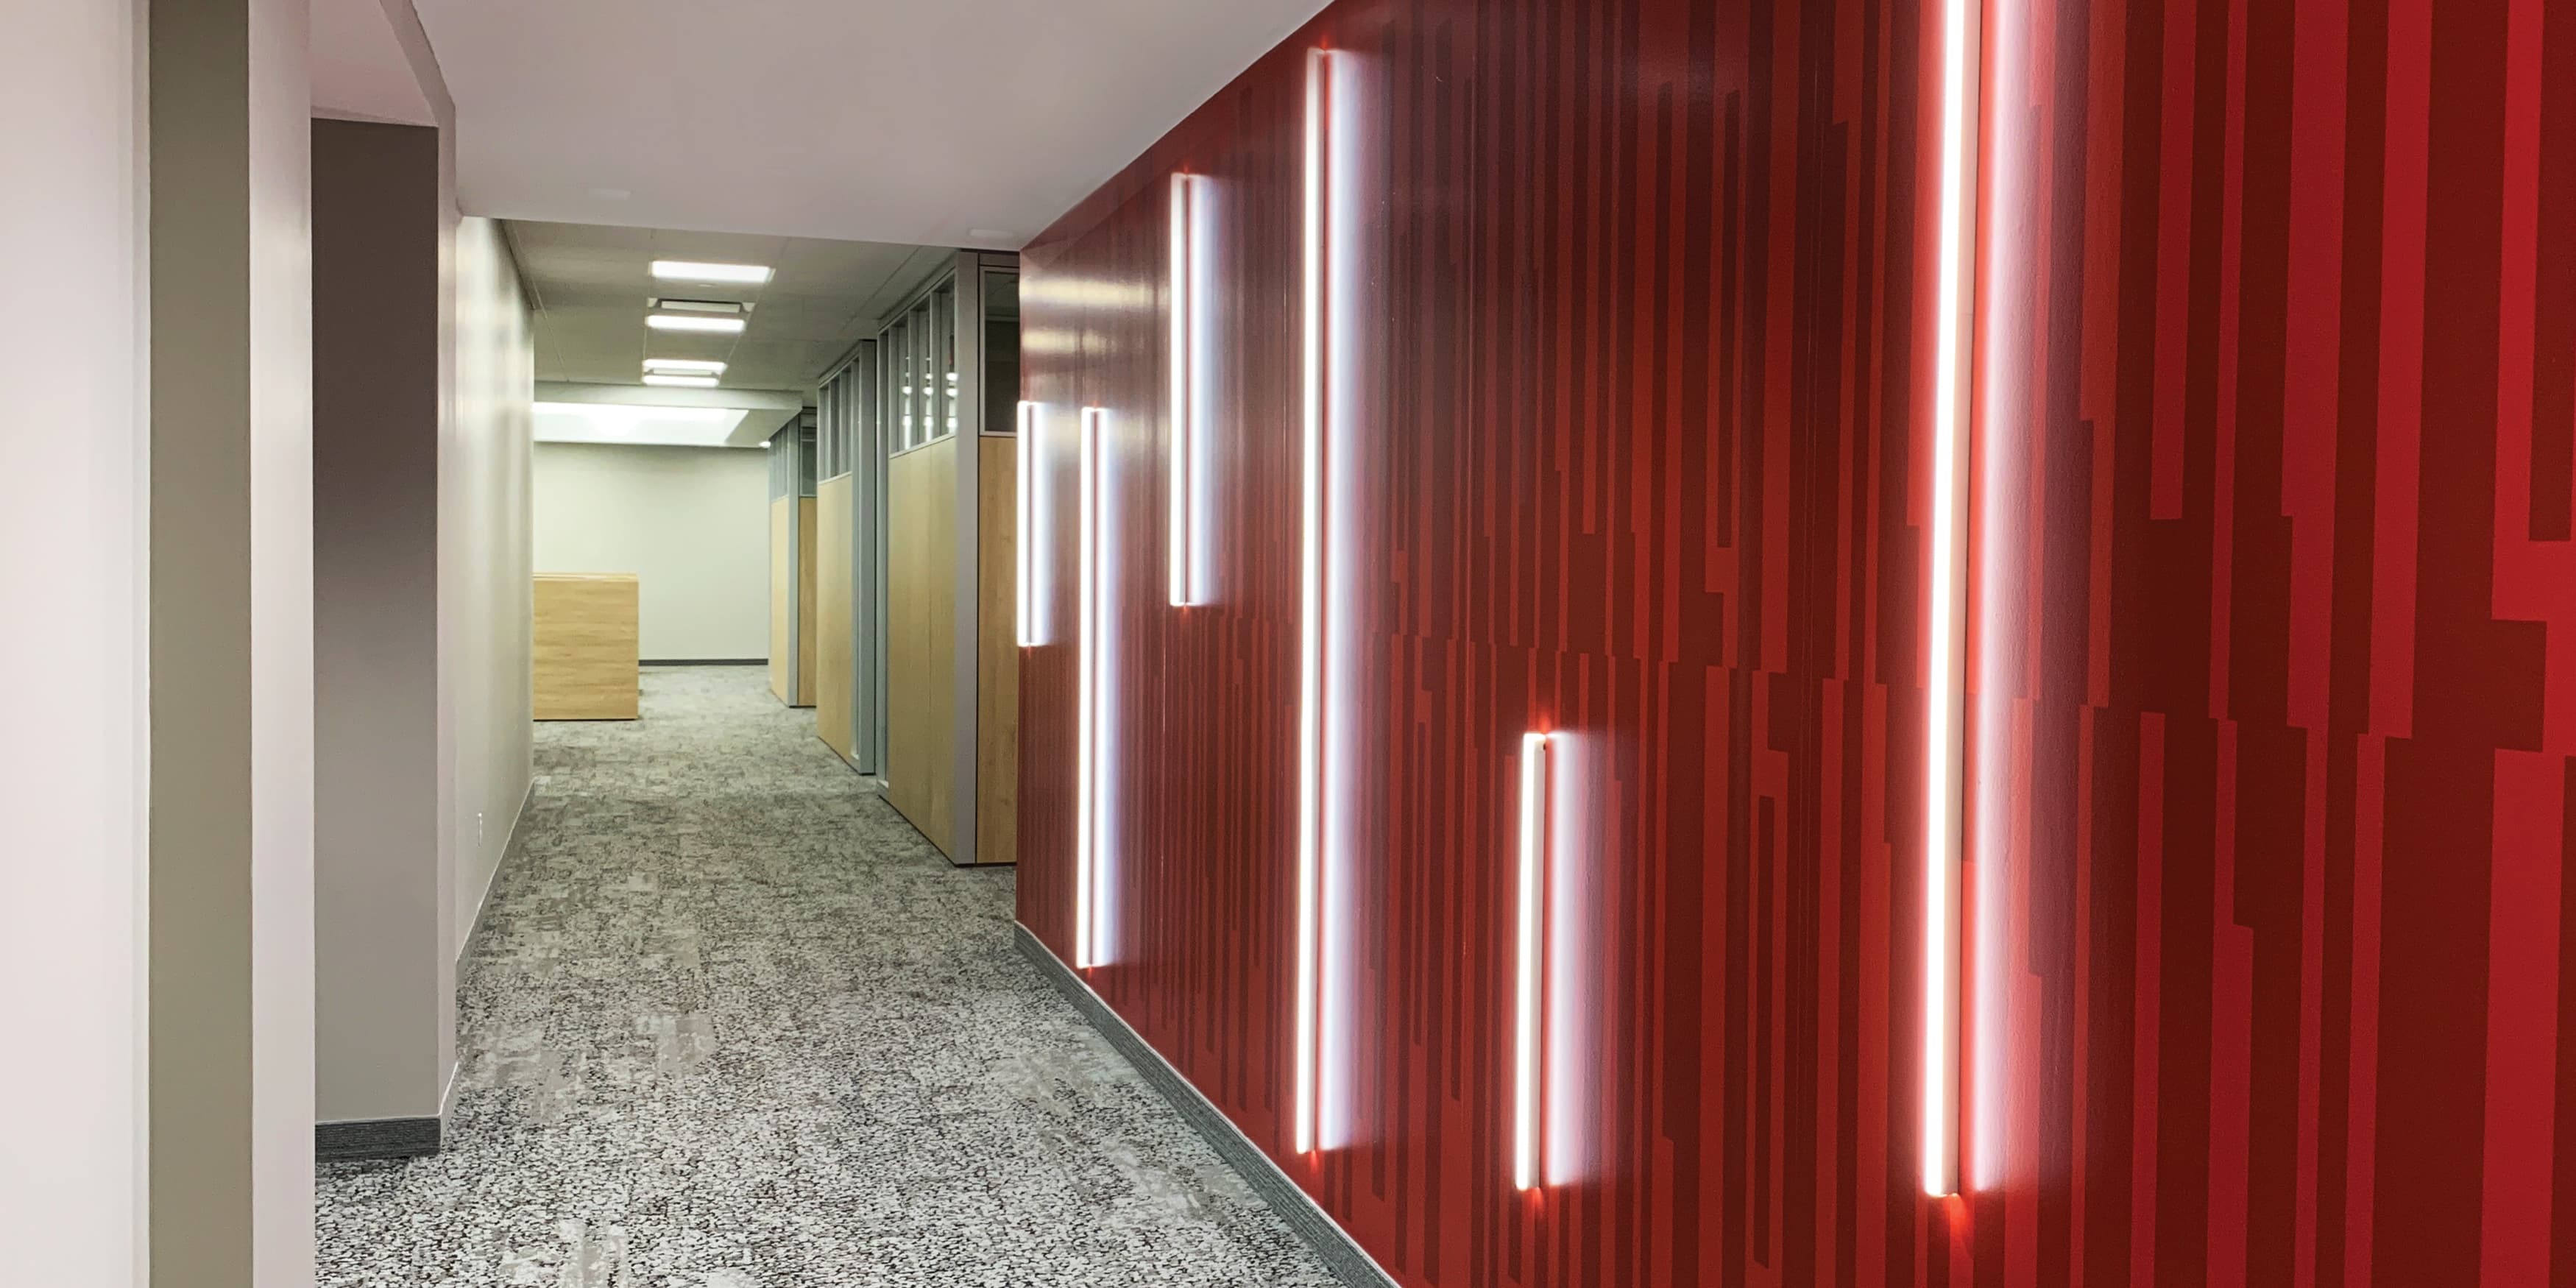 Speciality art mural by RSM Design for JMFE Headquarters consisting of red vertical painted lines in a pattern with red neon line art signage overlaying for office workplace design.